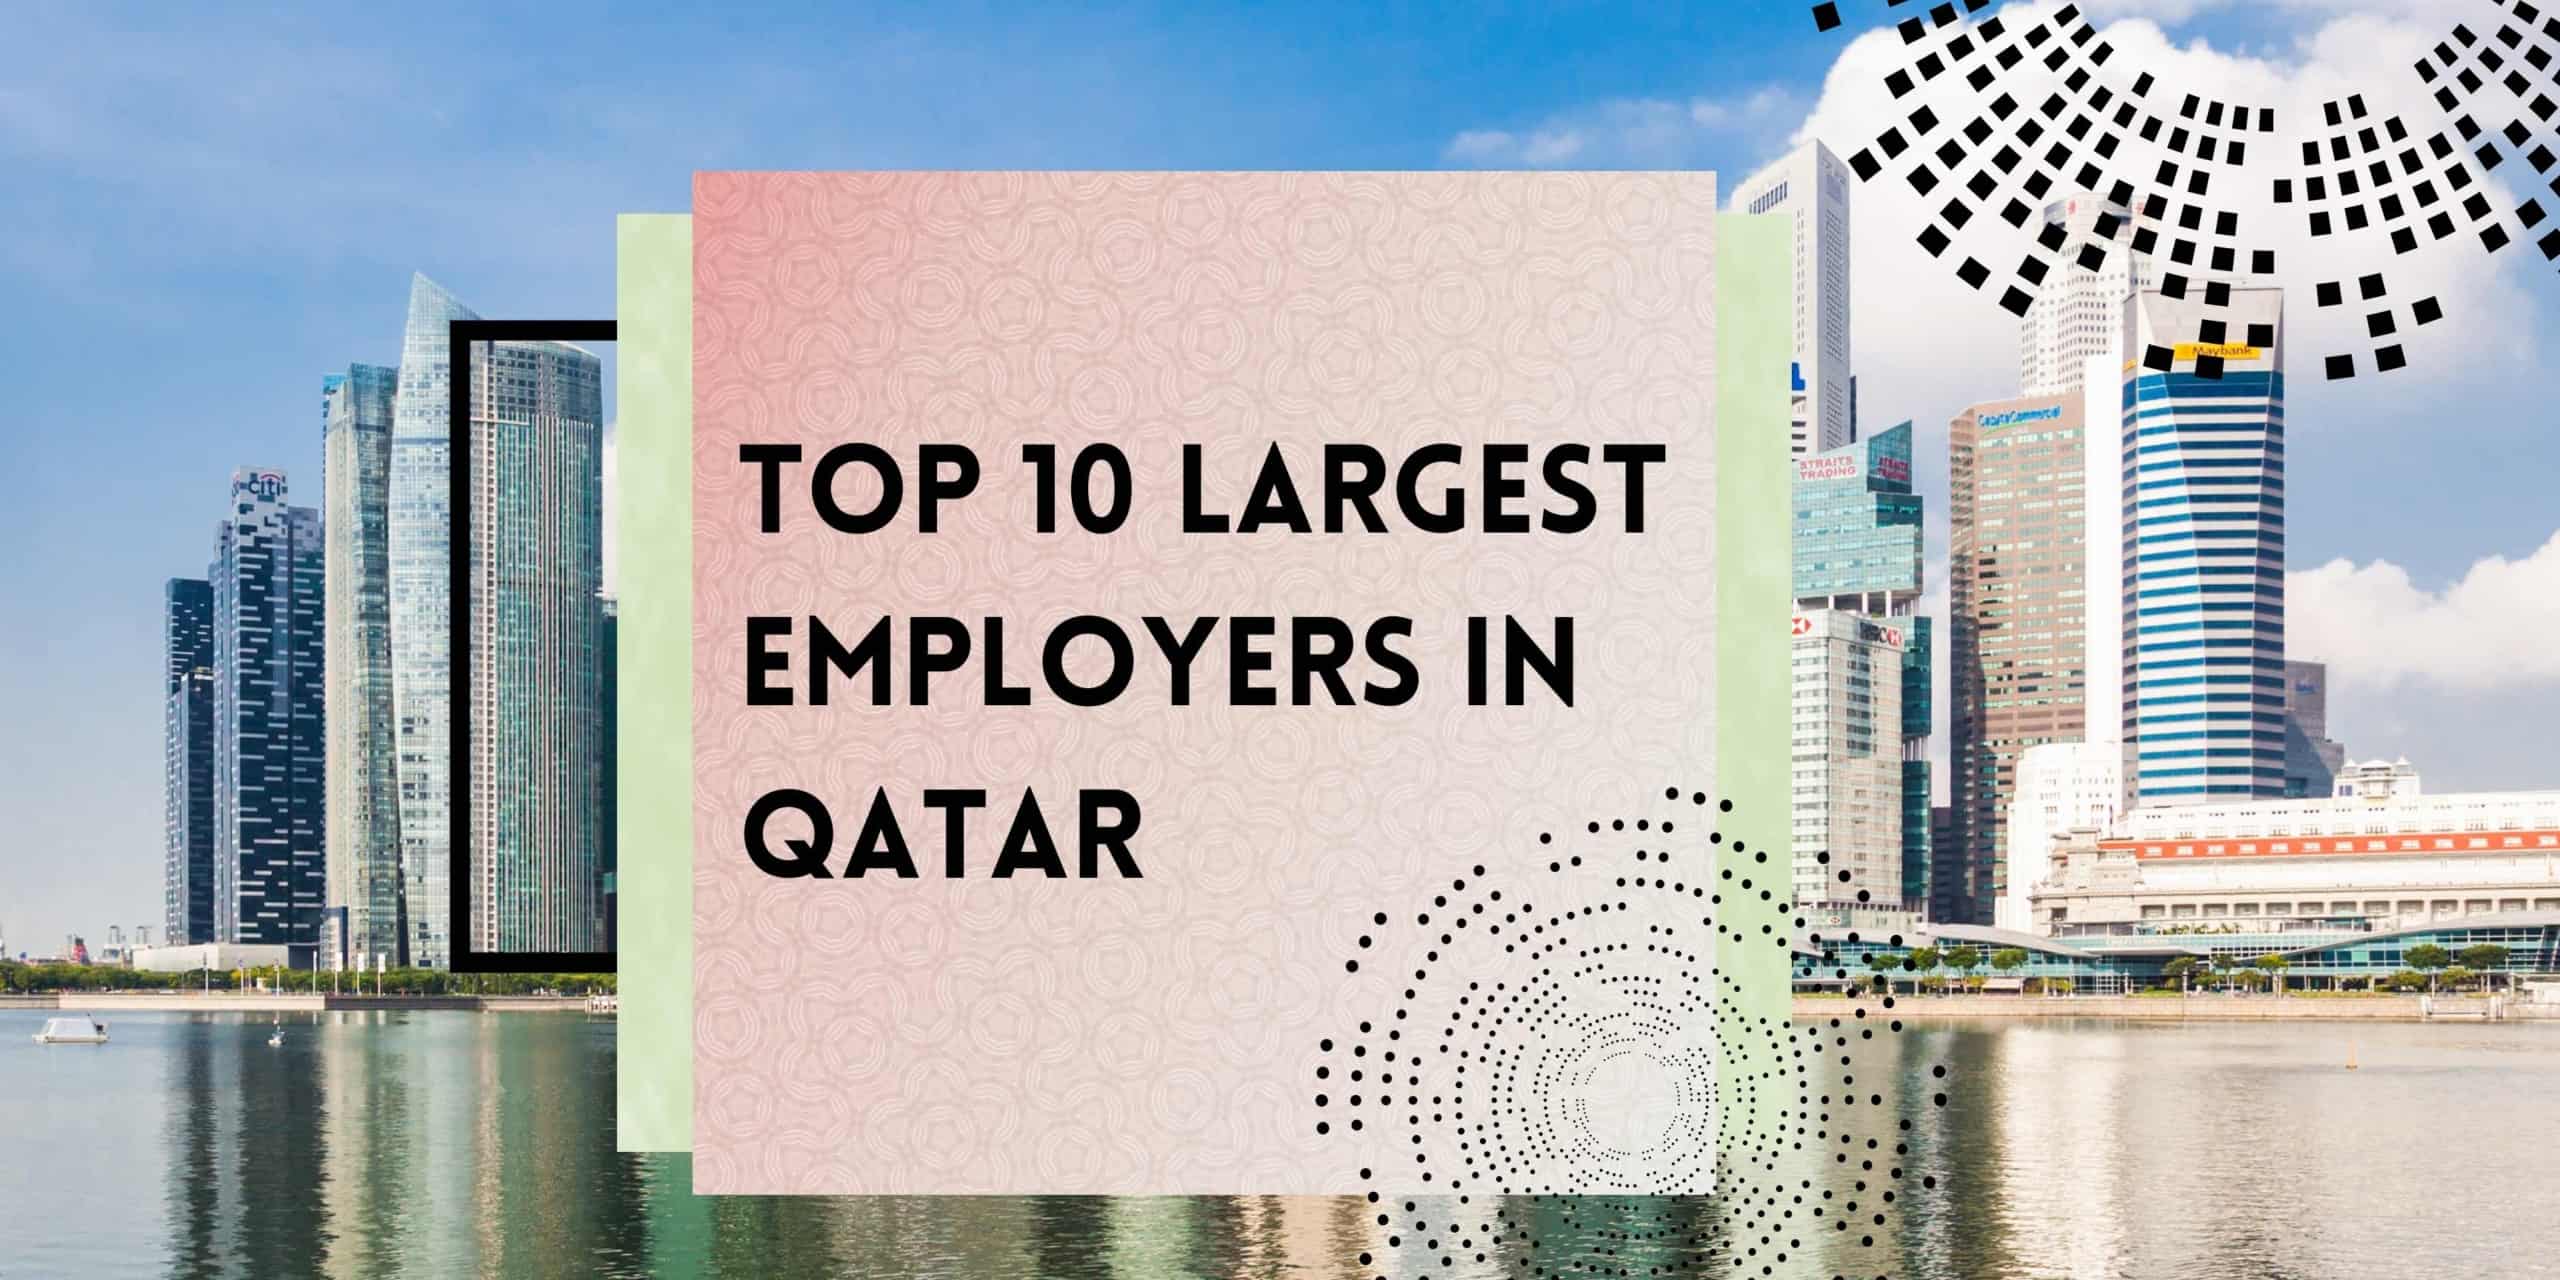 Top 10 Largest Employers in Qatar